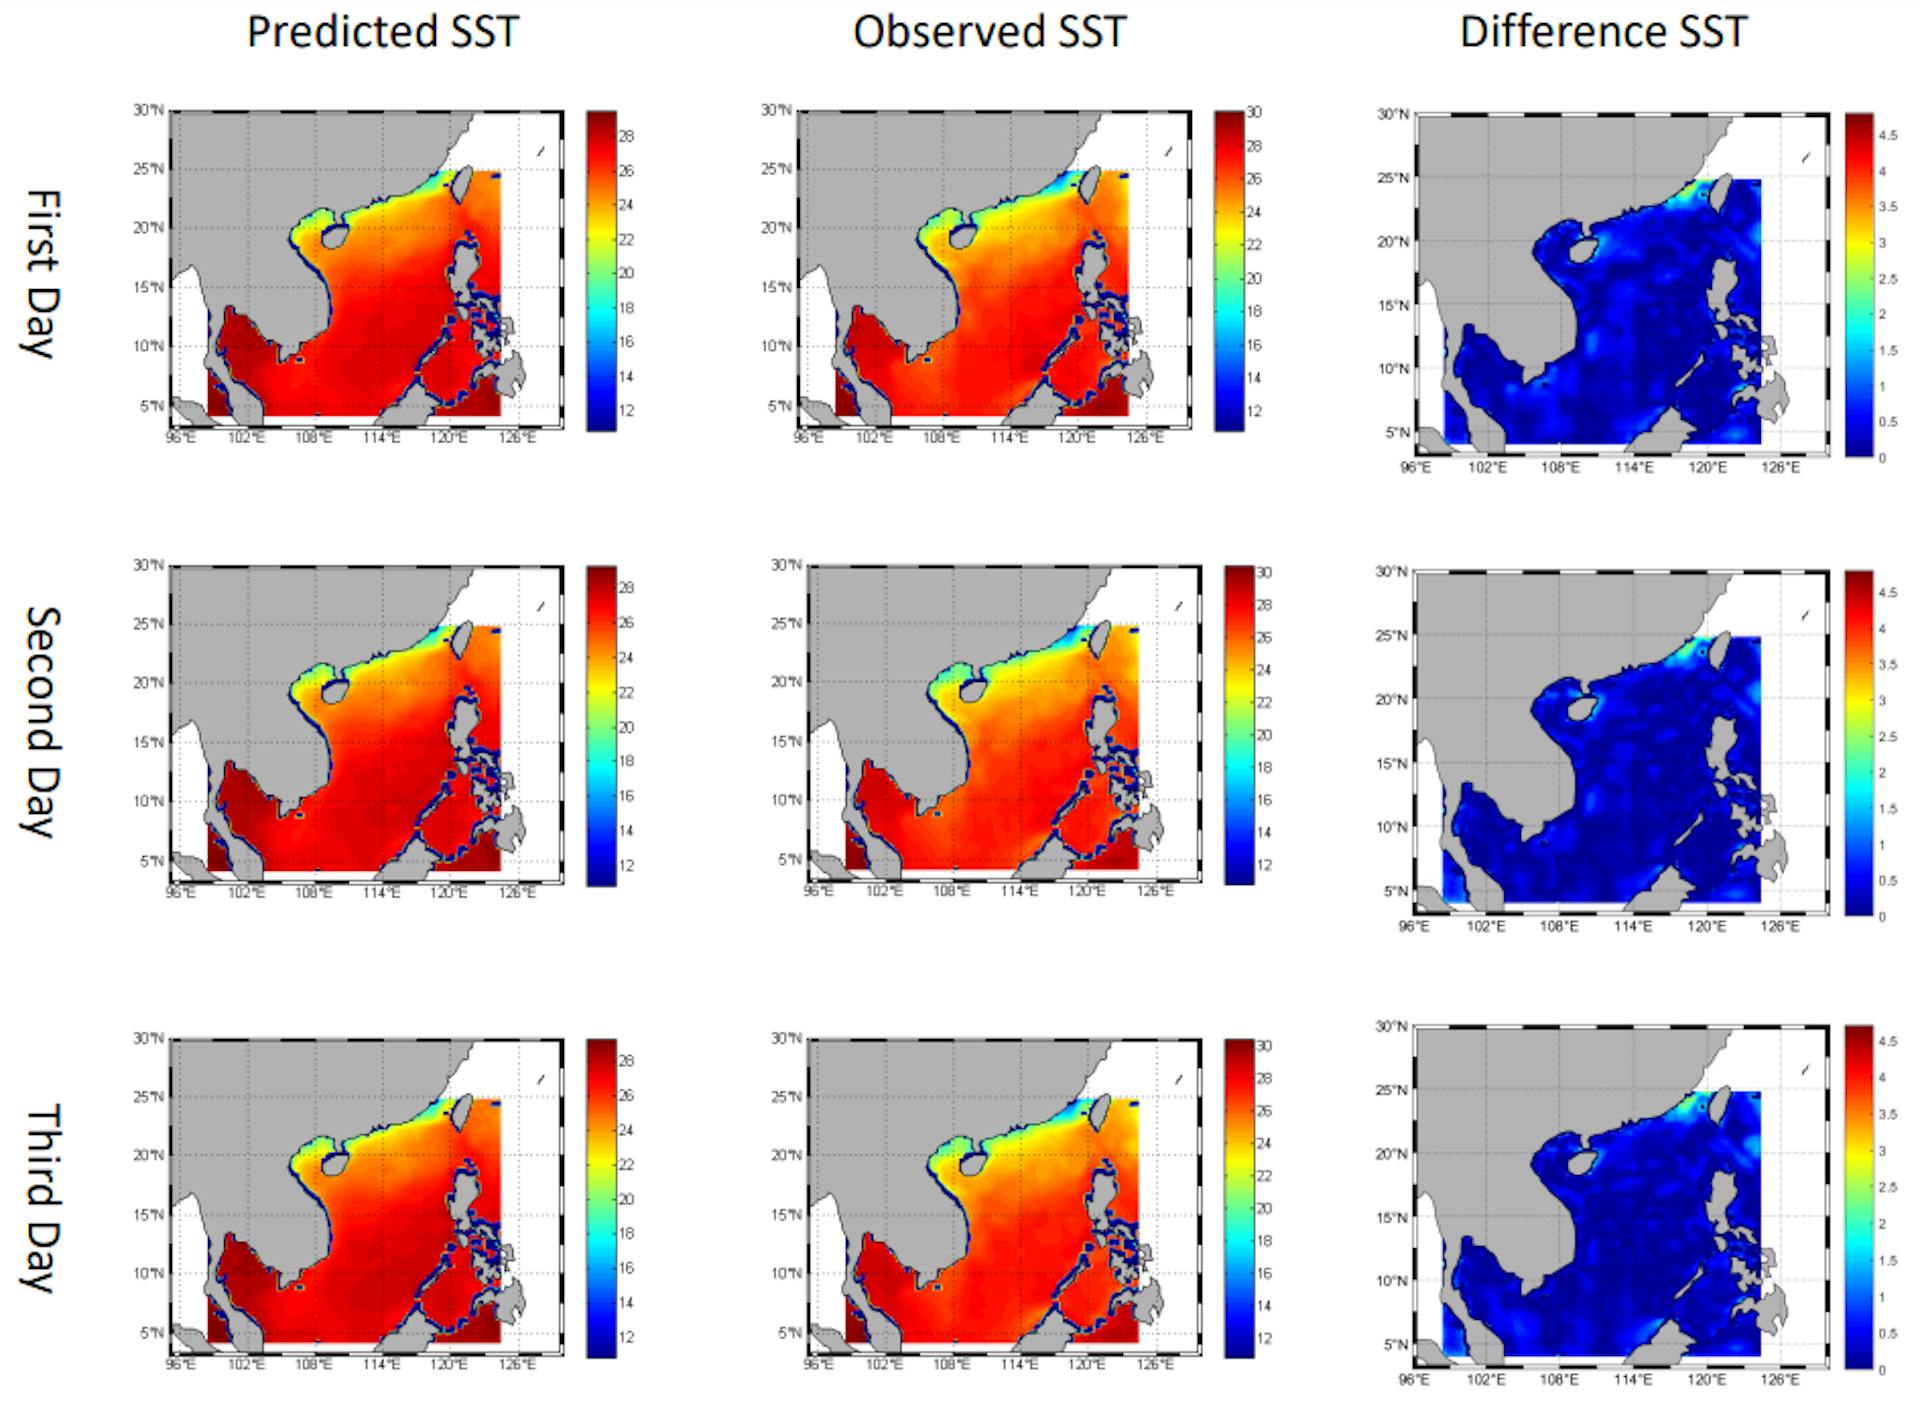 Fig. 11. Visualized results for the next three-day SST prediction. The first column shows the results of predicted SST. The ground truth observed SST data are shown in the second column. We present their difference in the third column.